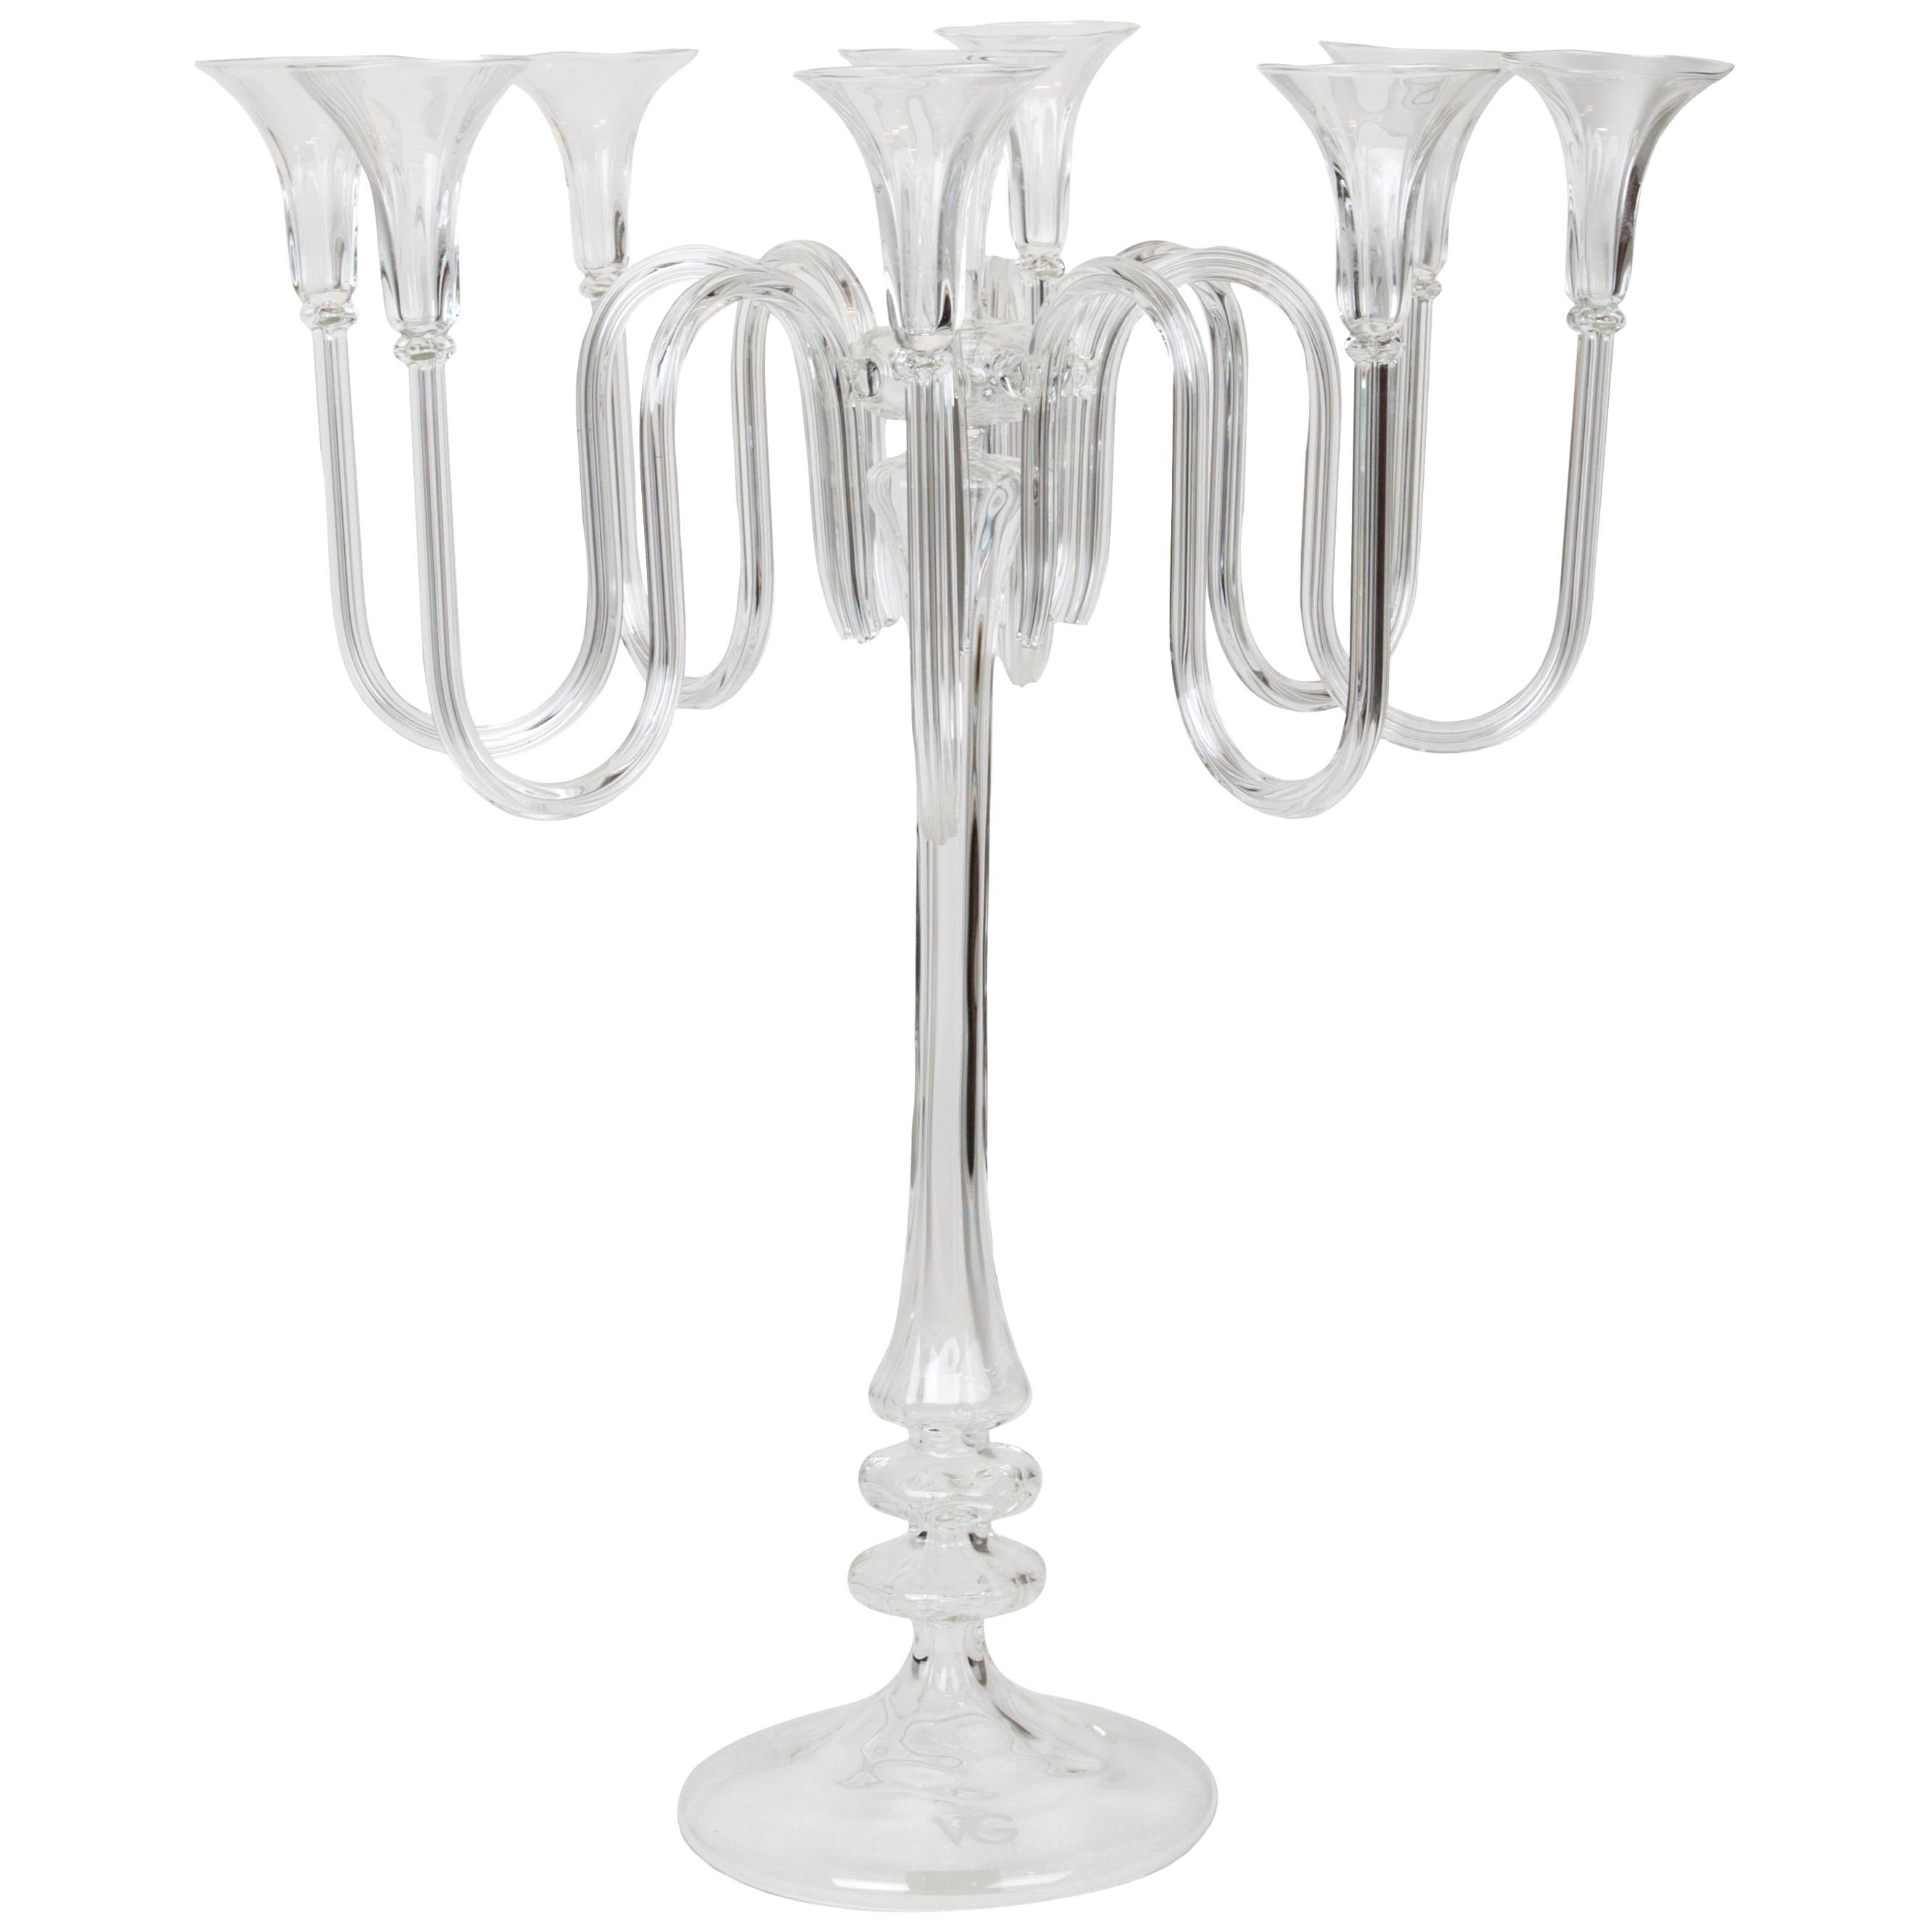 Candleholder Royal Pyrex with 9 Arms, in Pyrex, Italy For Sale